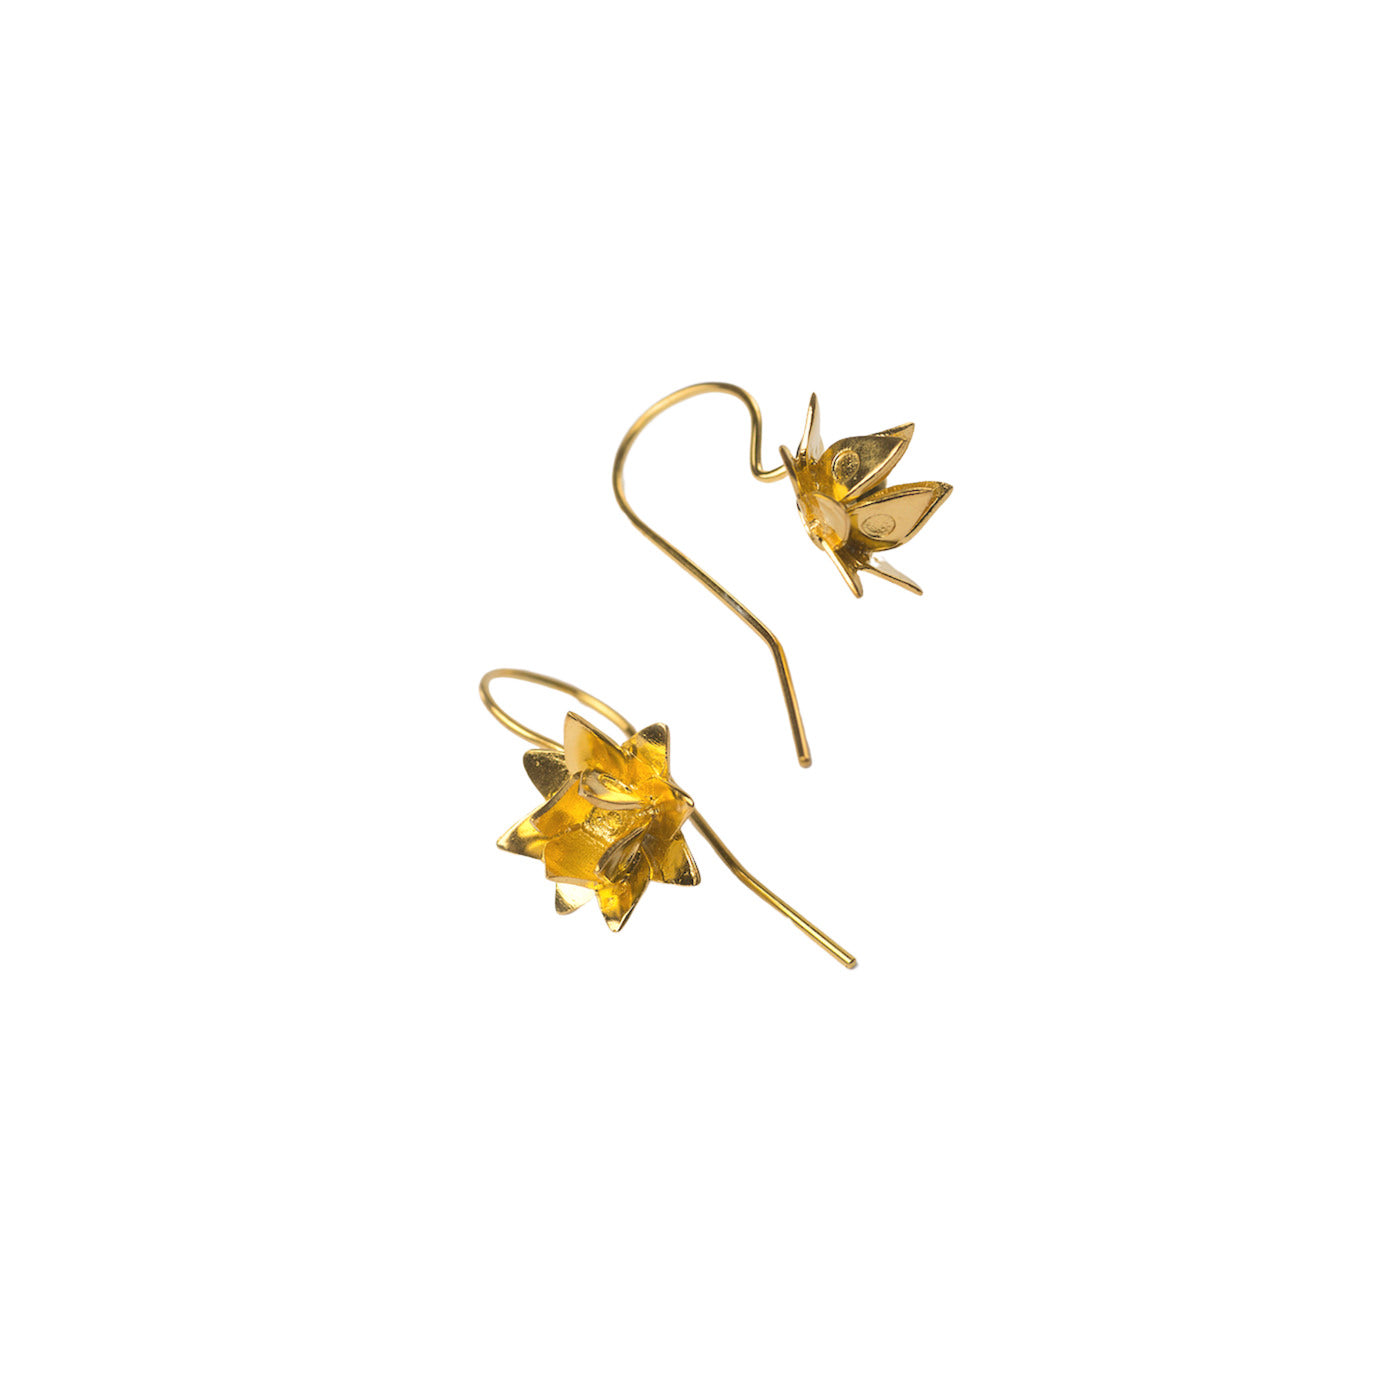 Floral Pattern- Lotus Shaped Fish Hook Earrings For Women With